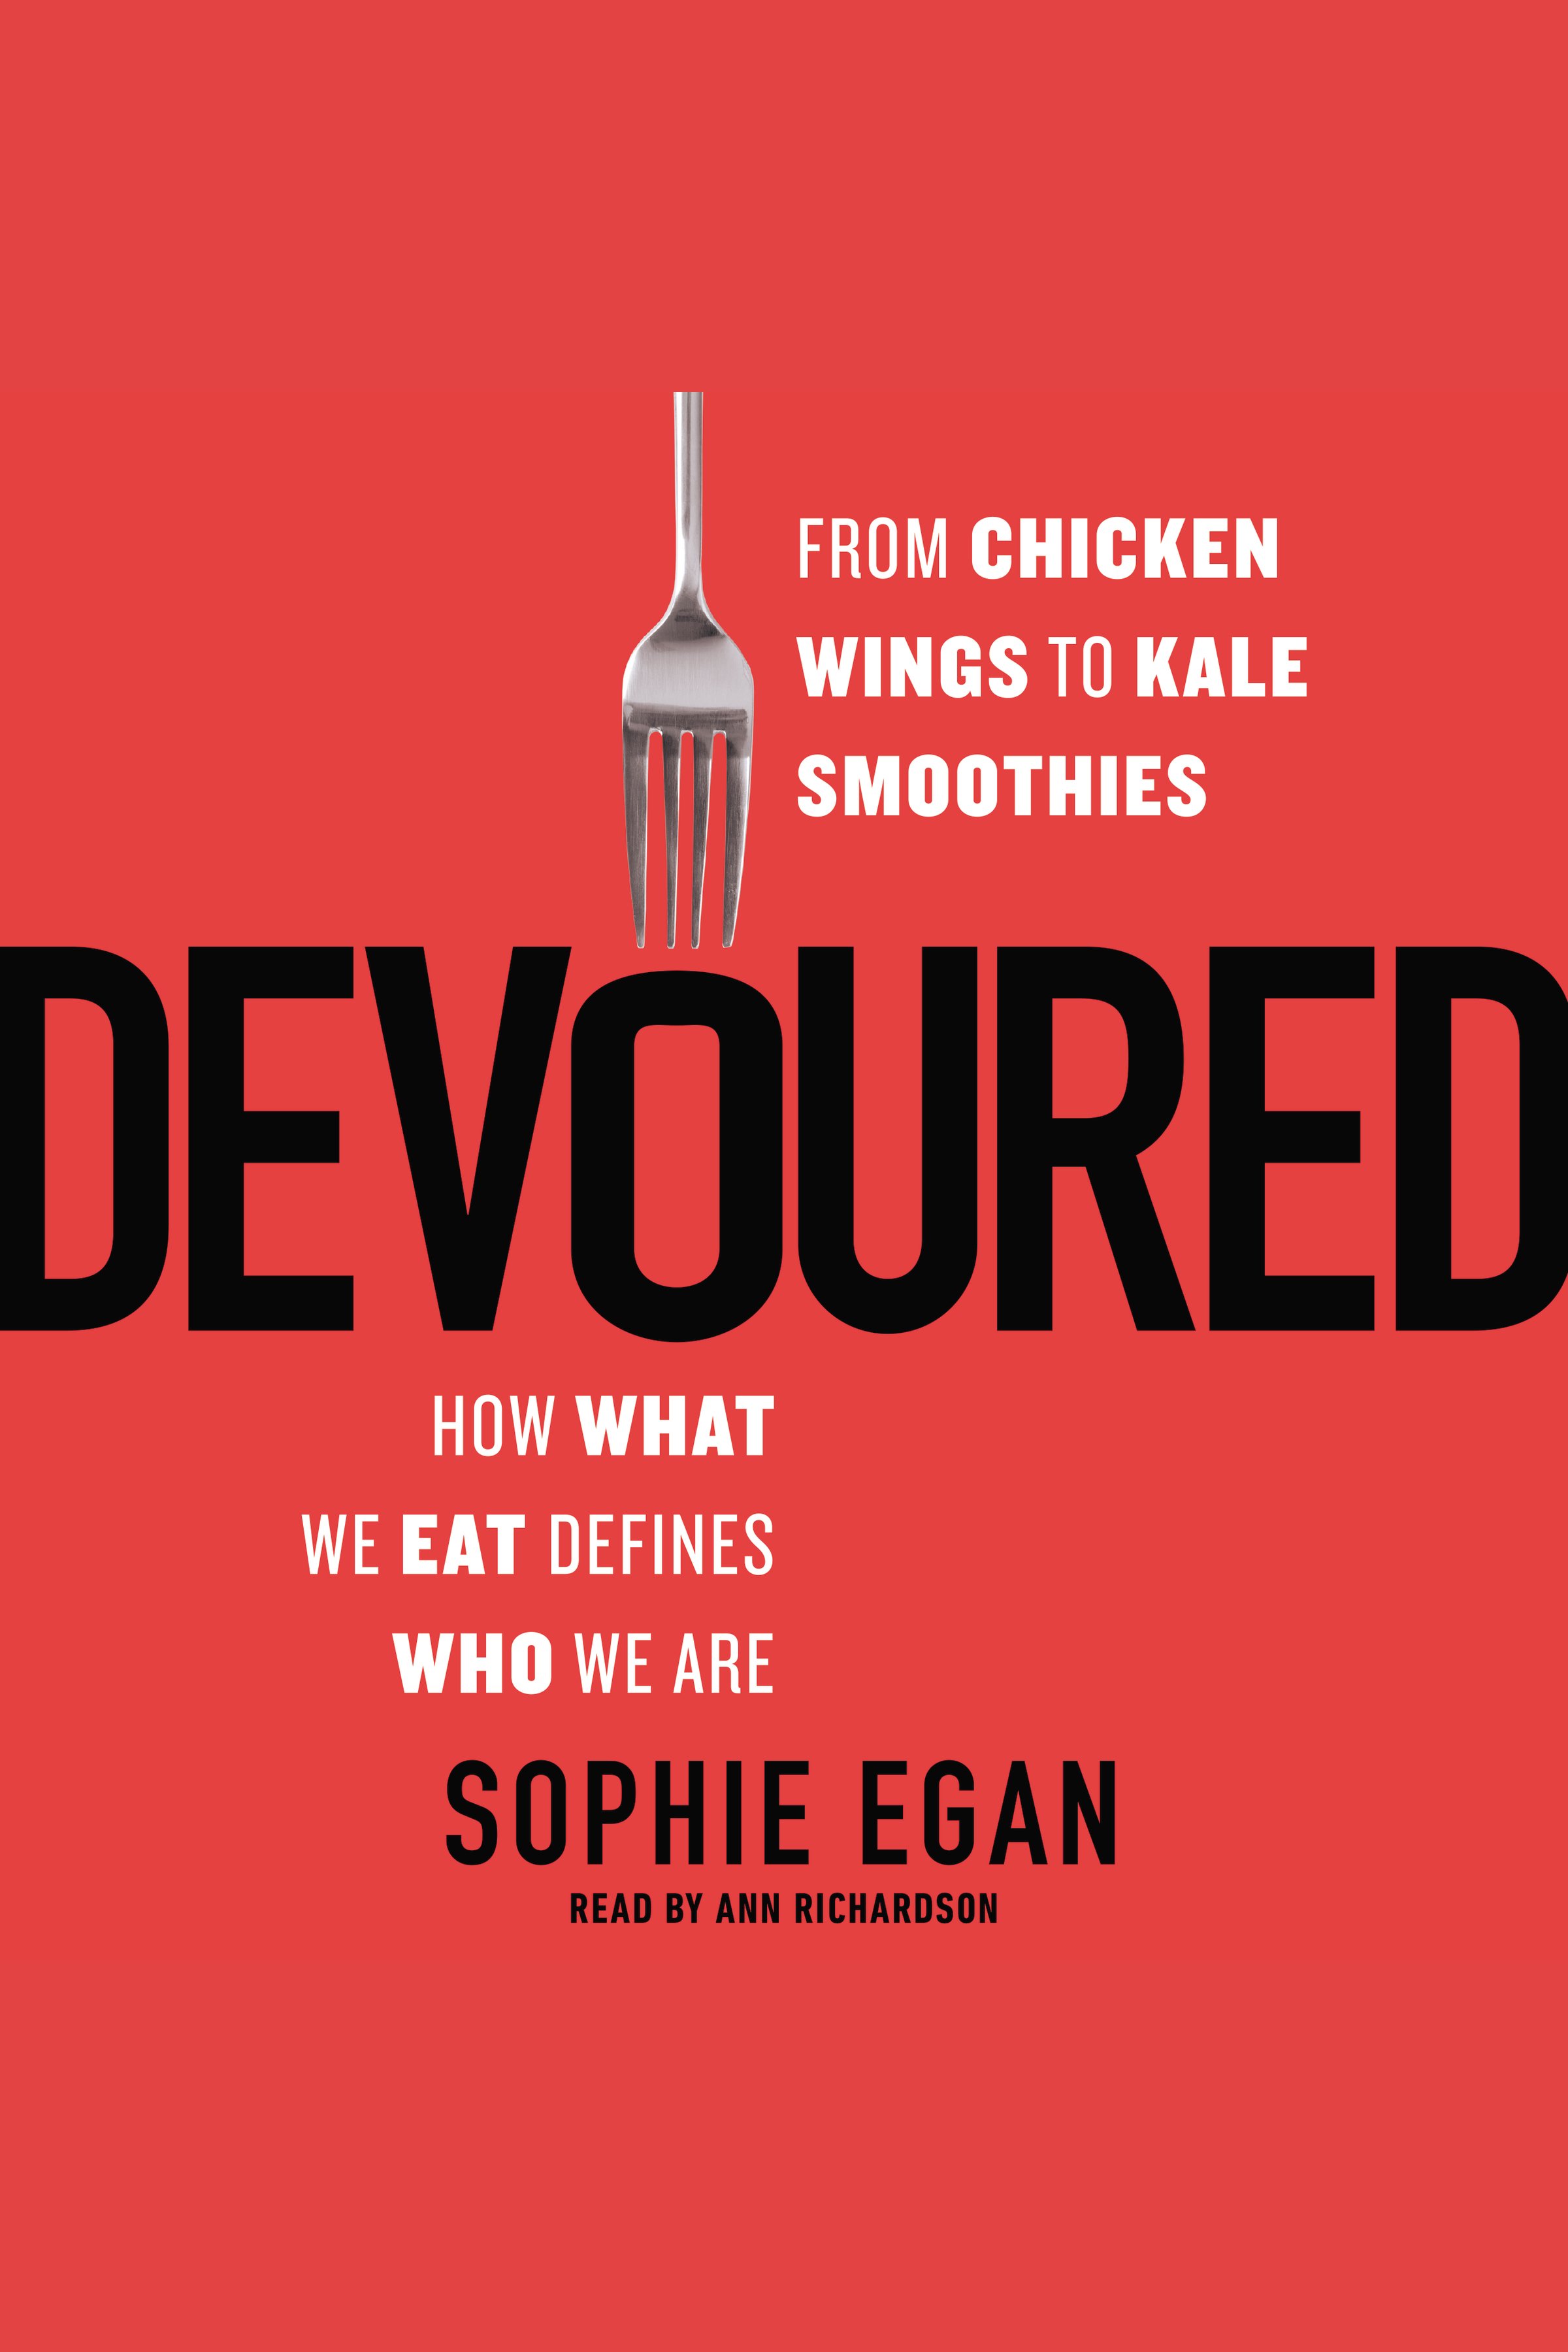 Imagen de portada para Devoured [electronic resource] : From Chicken Wings to Kale Smoothies - How What We Eat Defines Who We Are